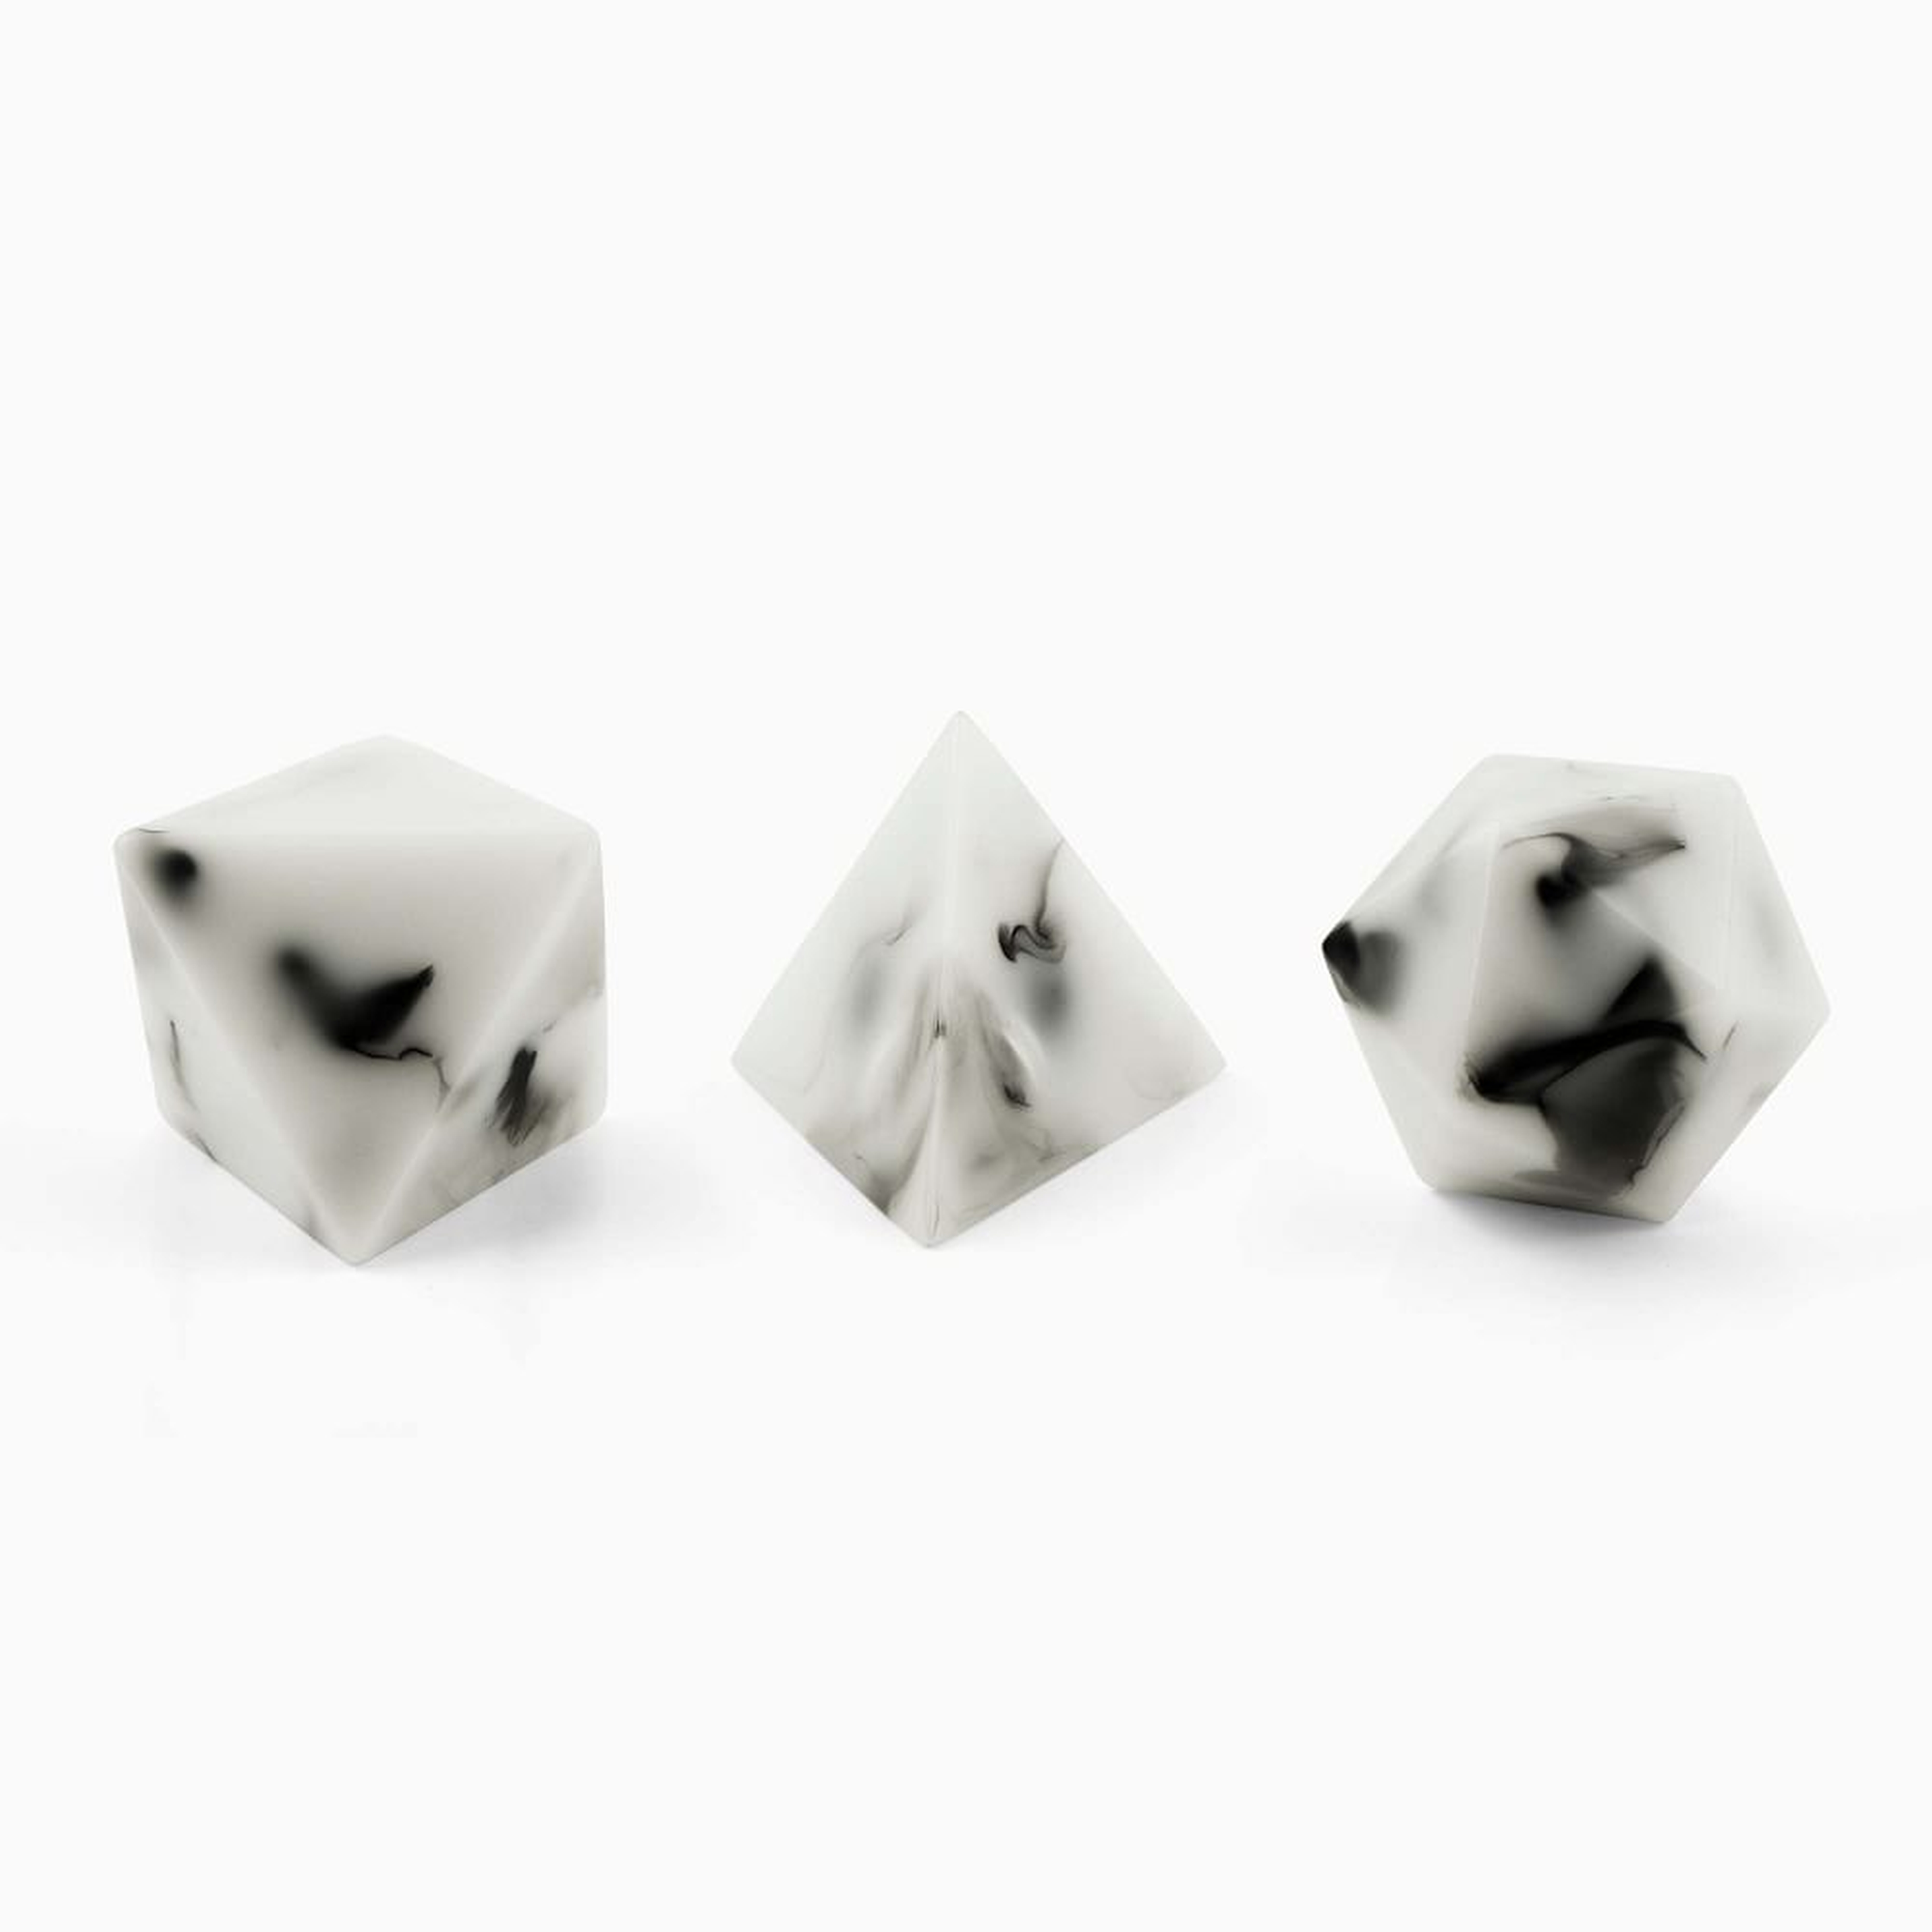 Magnetic Marble Objects, Set of 3 - West Elm